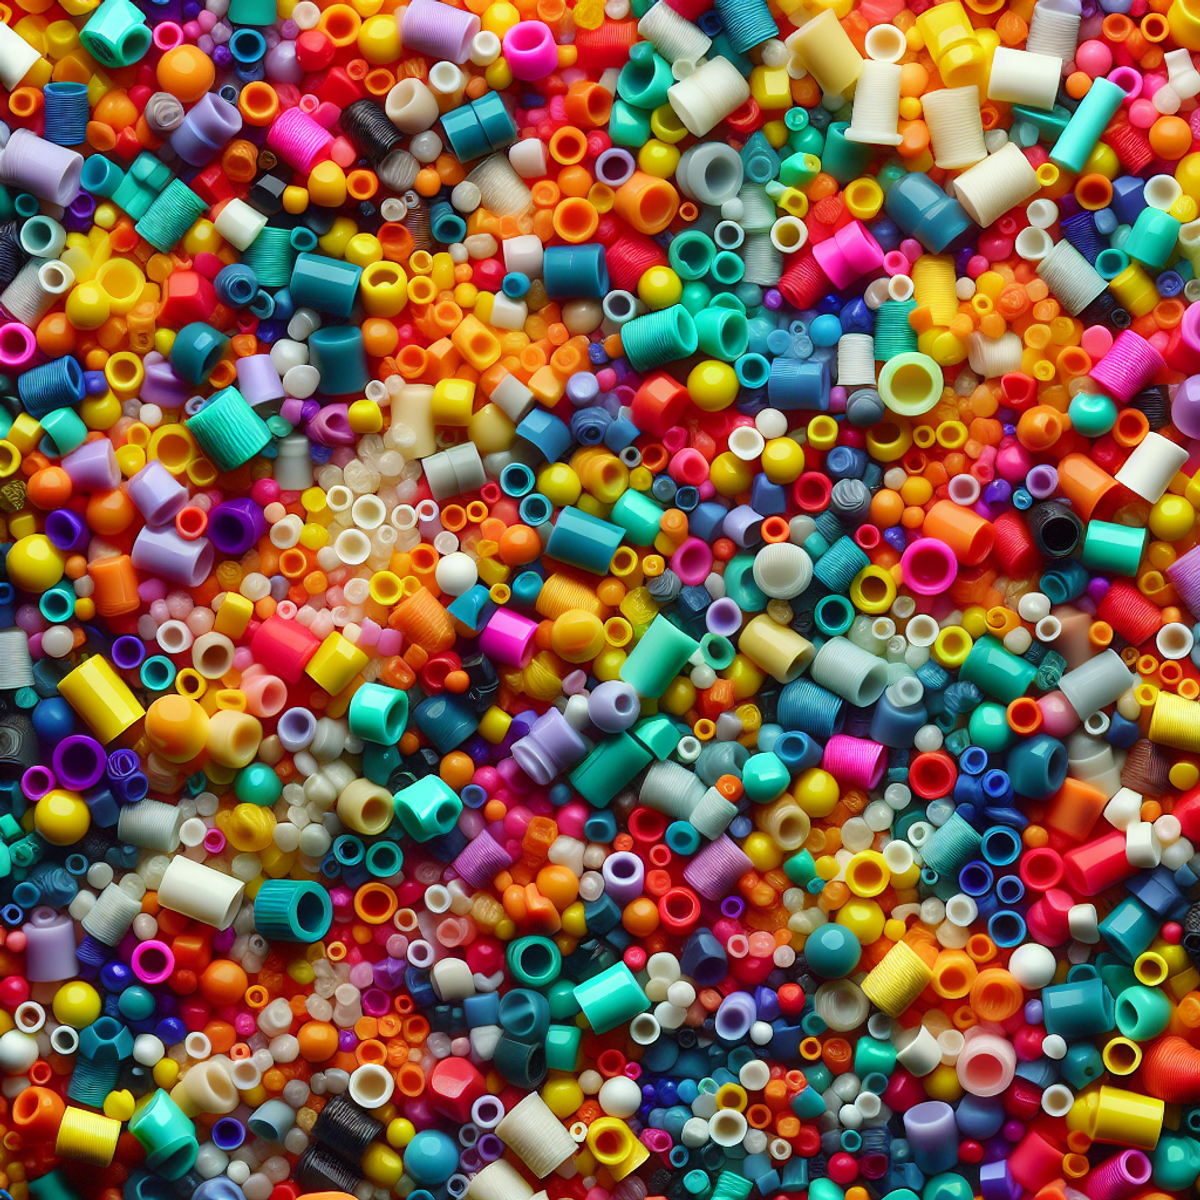 Close-up of vibrant, multicolored PVC plastic granules spread randomly, showcasing their diversity and potential for molding into customized shapes.